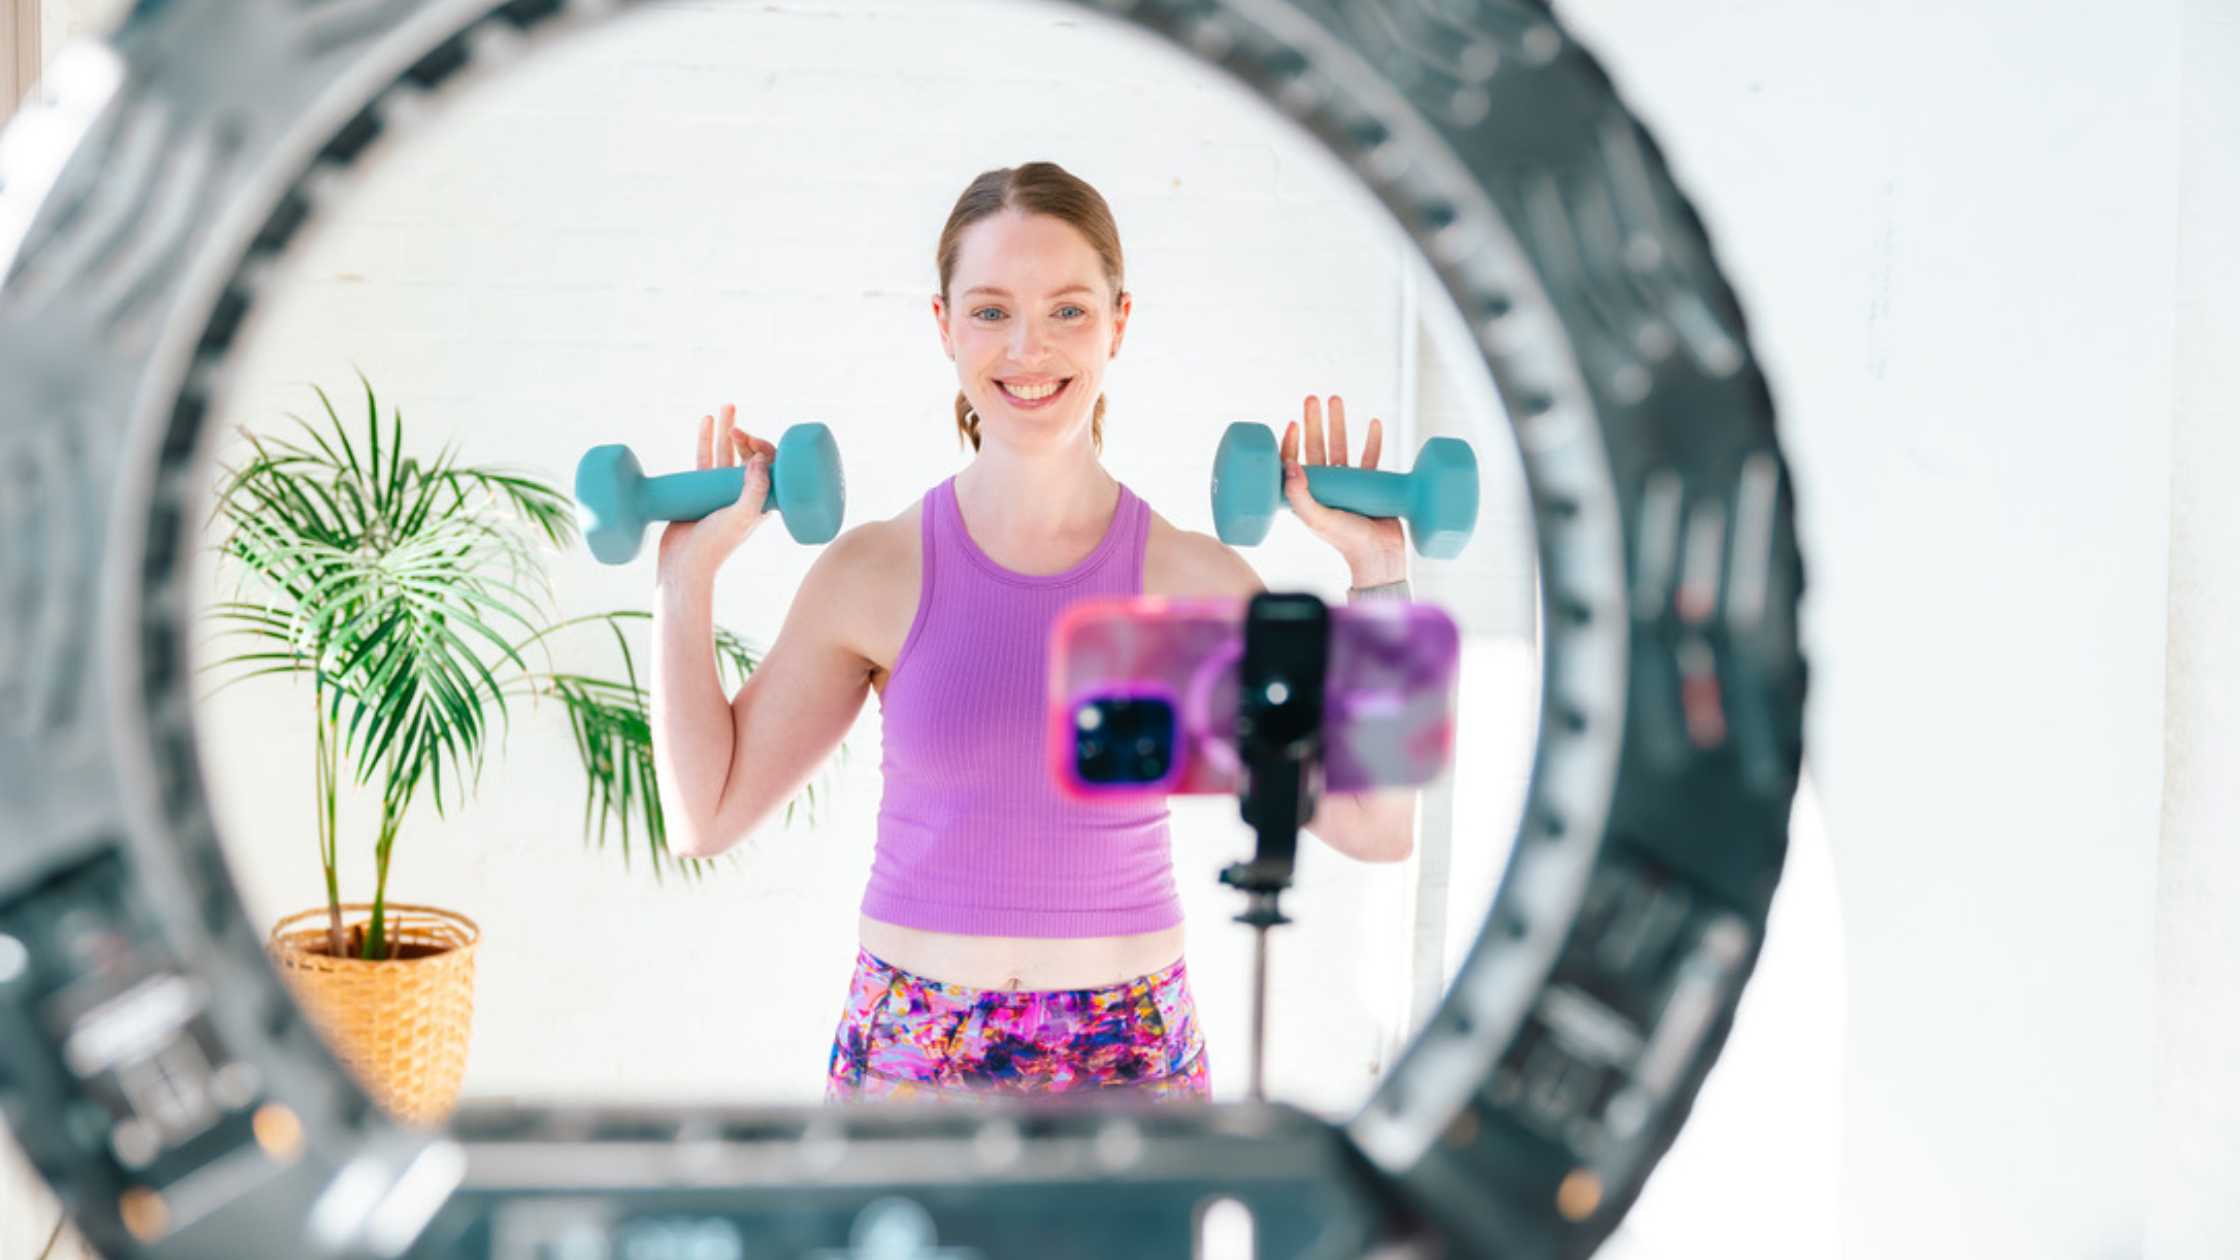 What equipment do I need to live stream my fitness class?